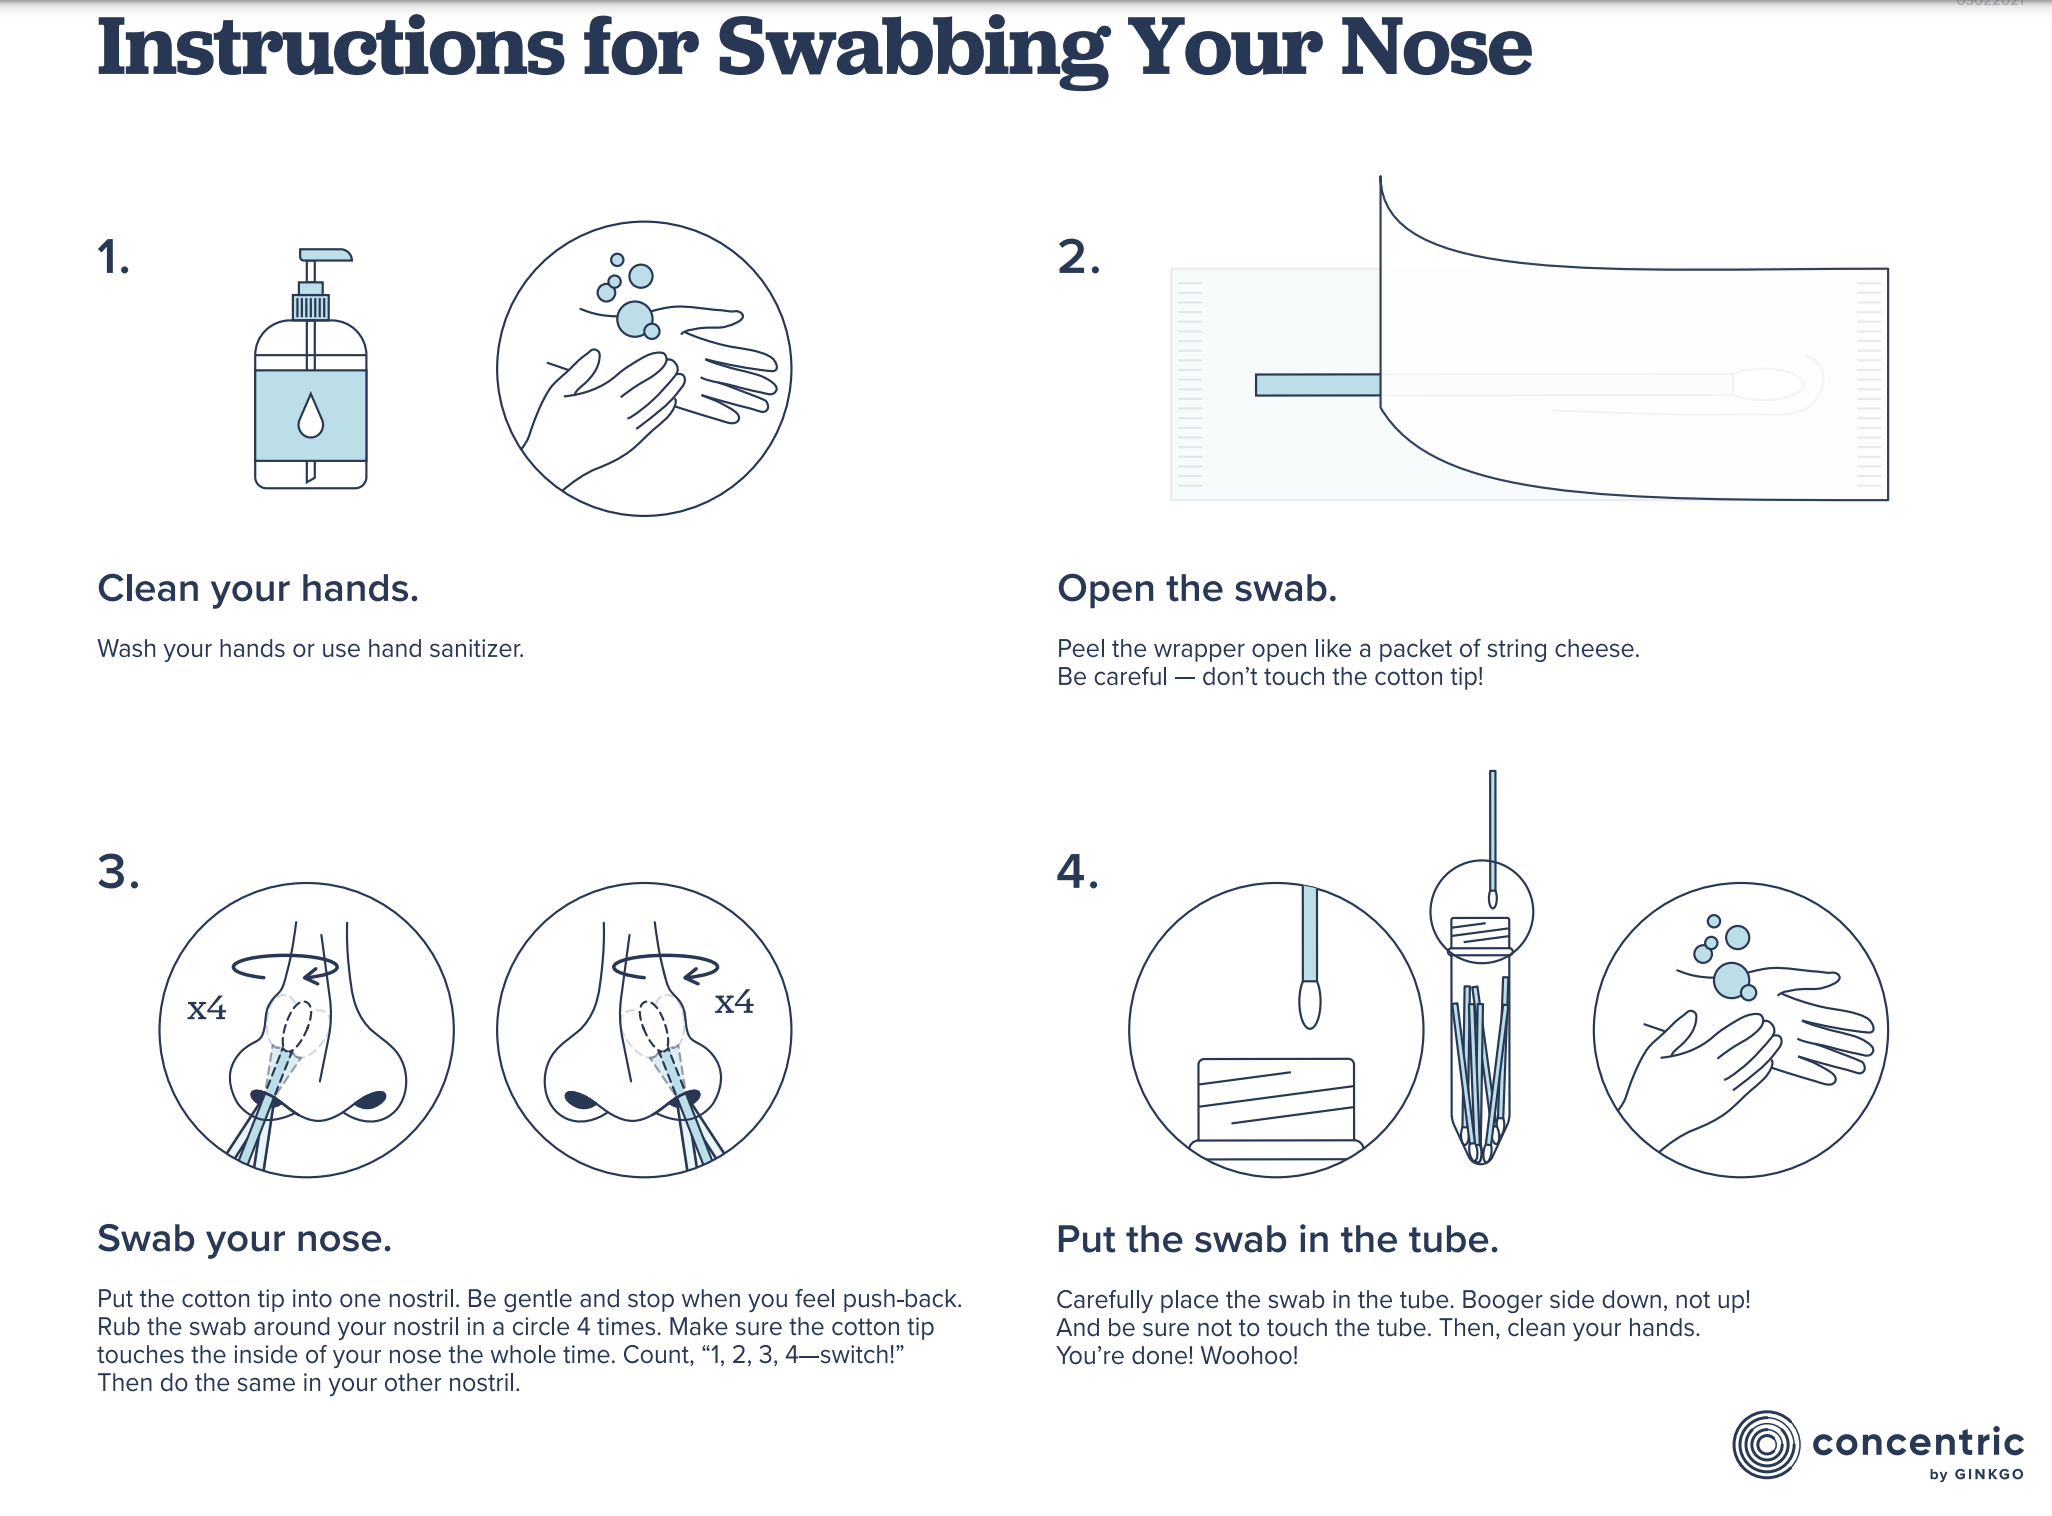 Instructions to swab nose